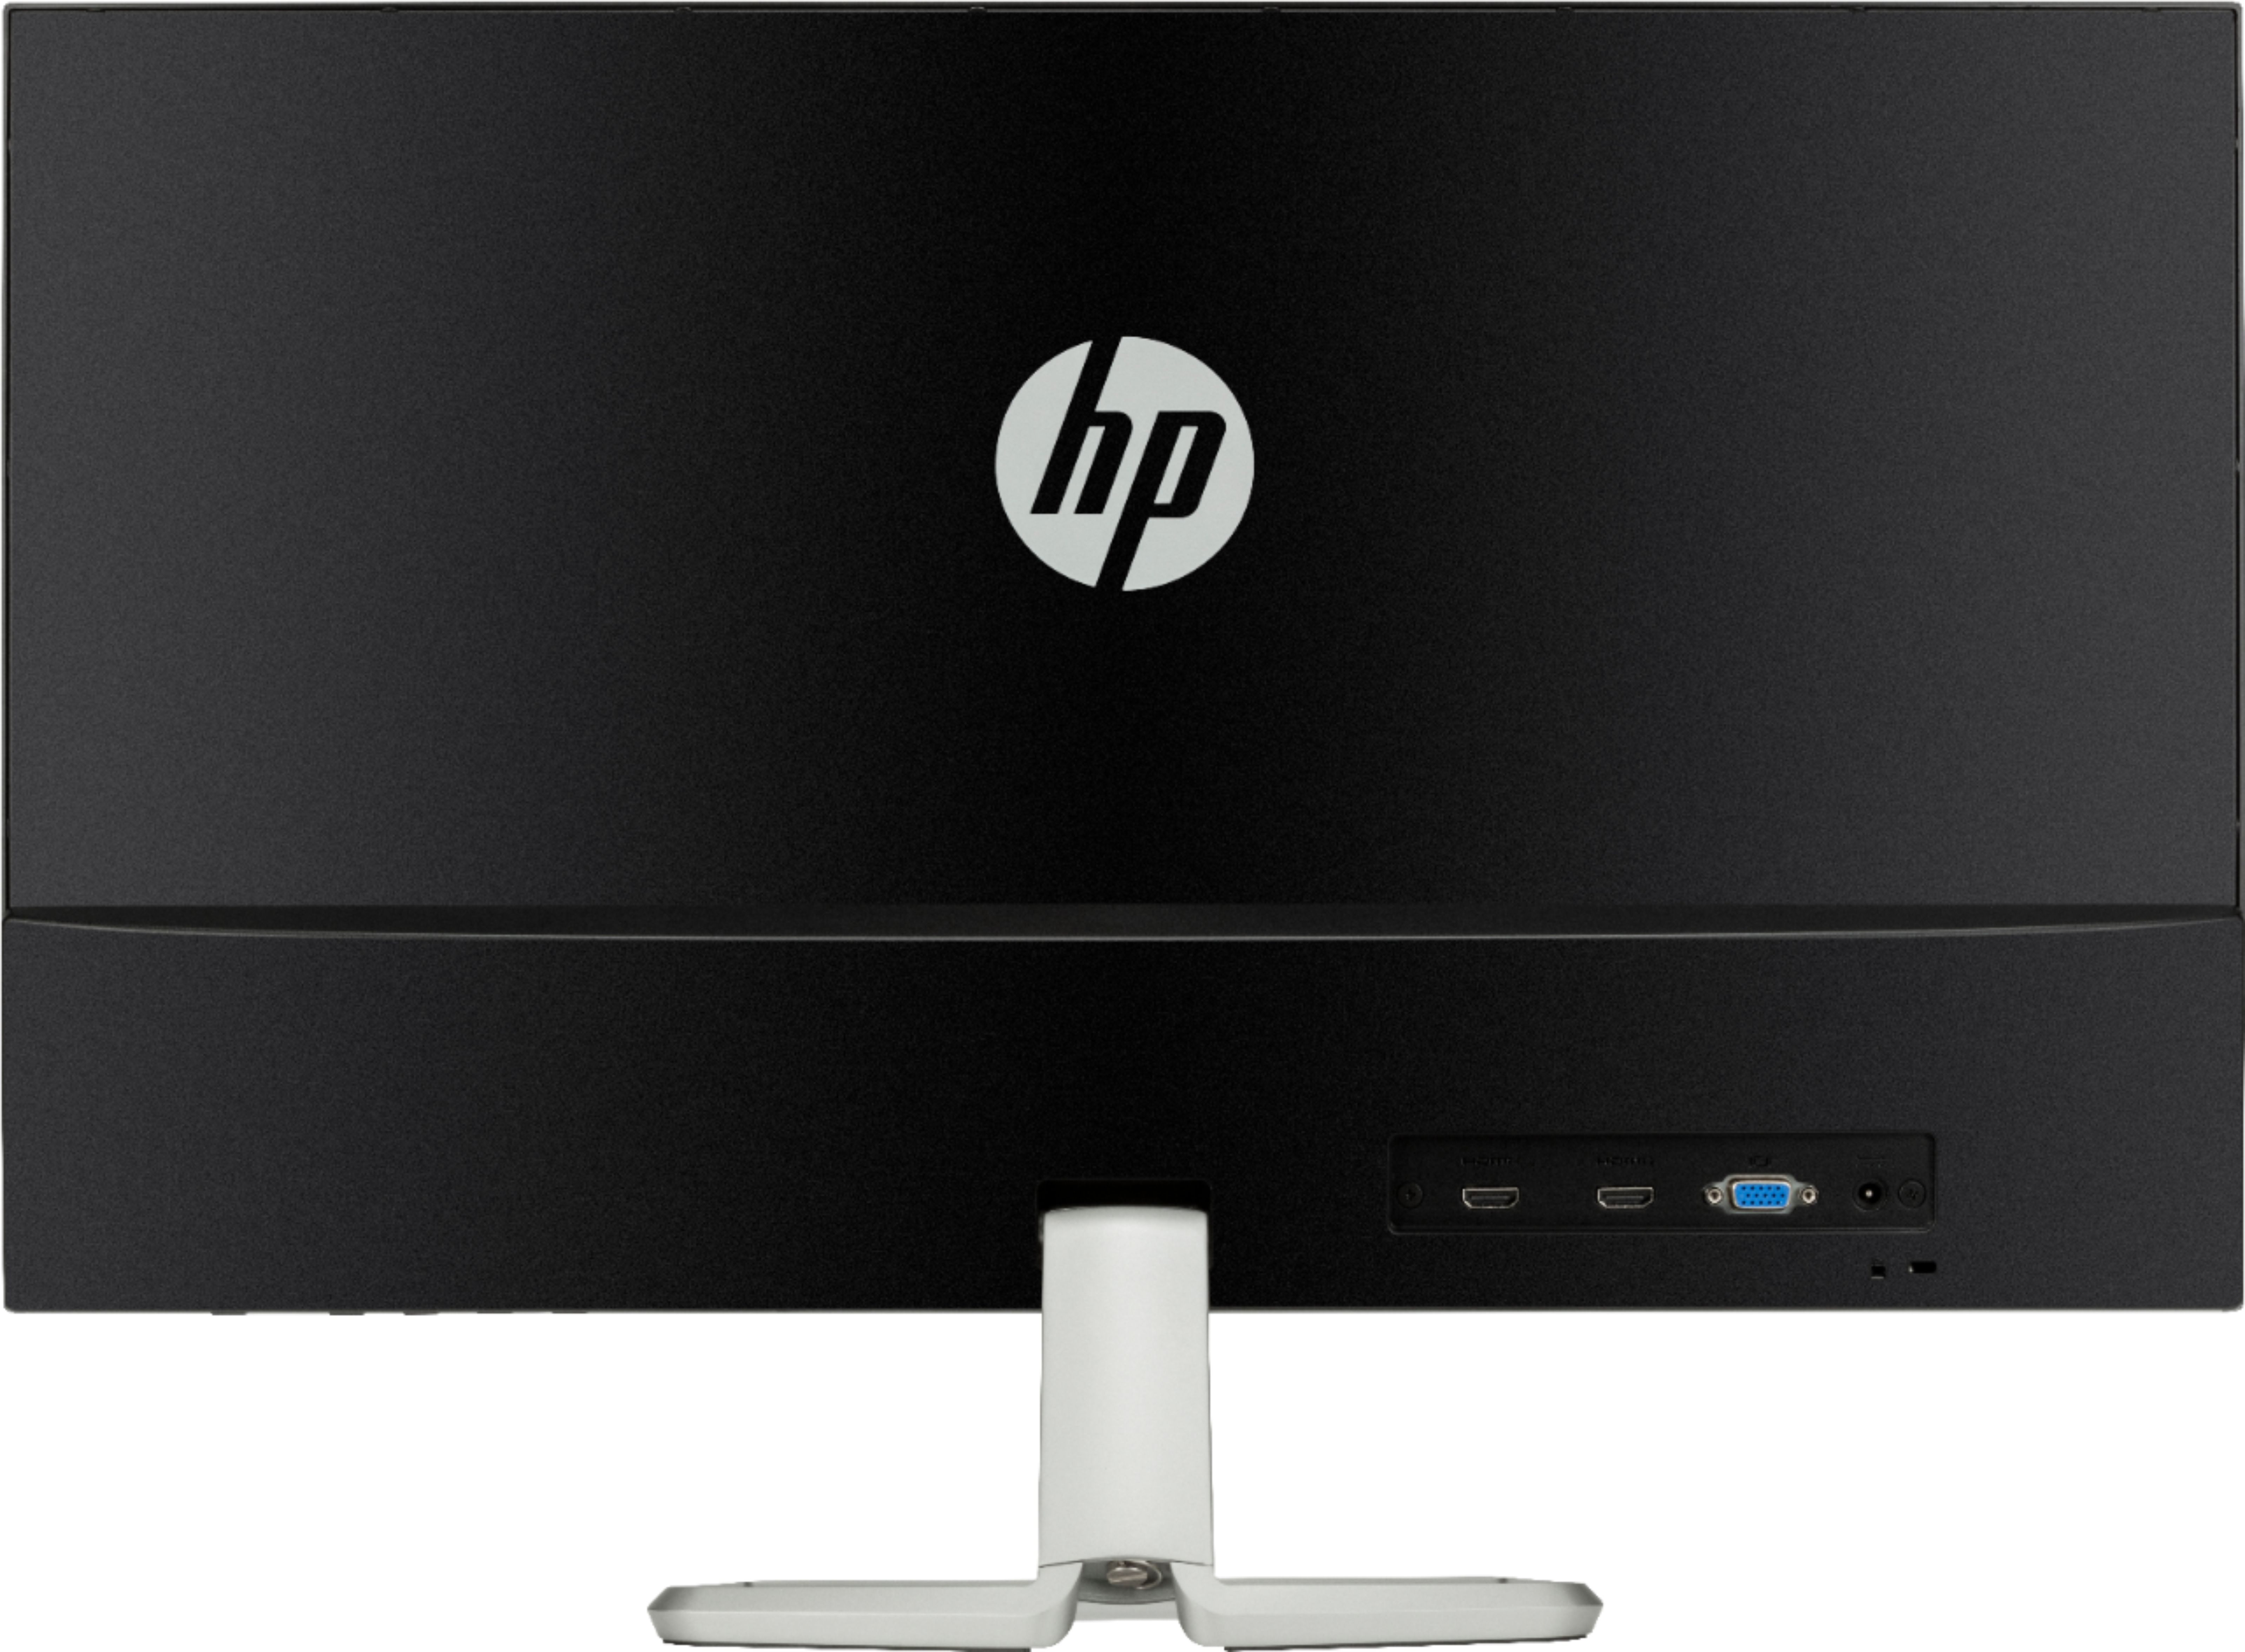 Back View: HP - Geek Squad Certified Refurbished 27" IPS LED FHD FreeSync Monitor - Natural Silver